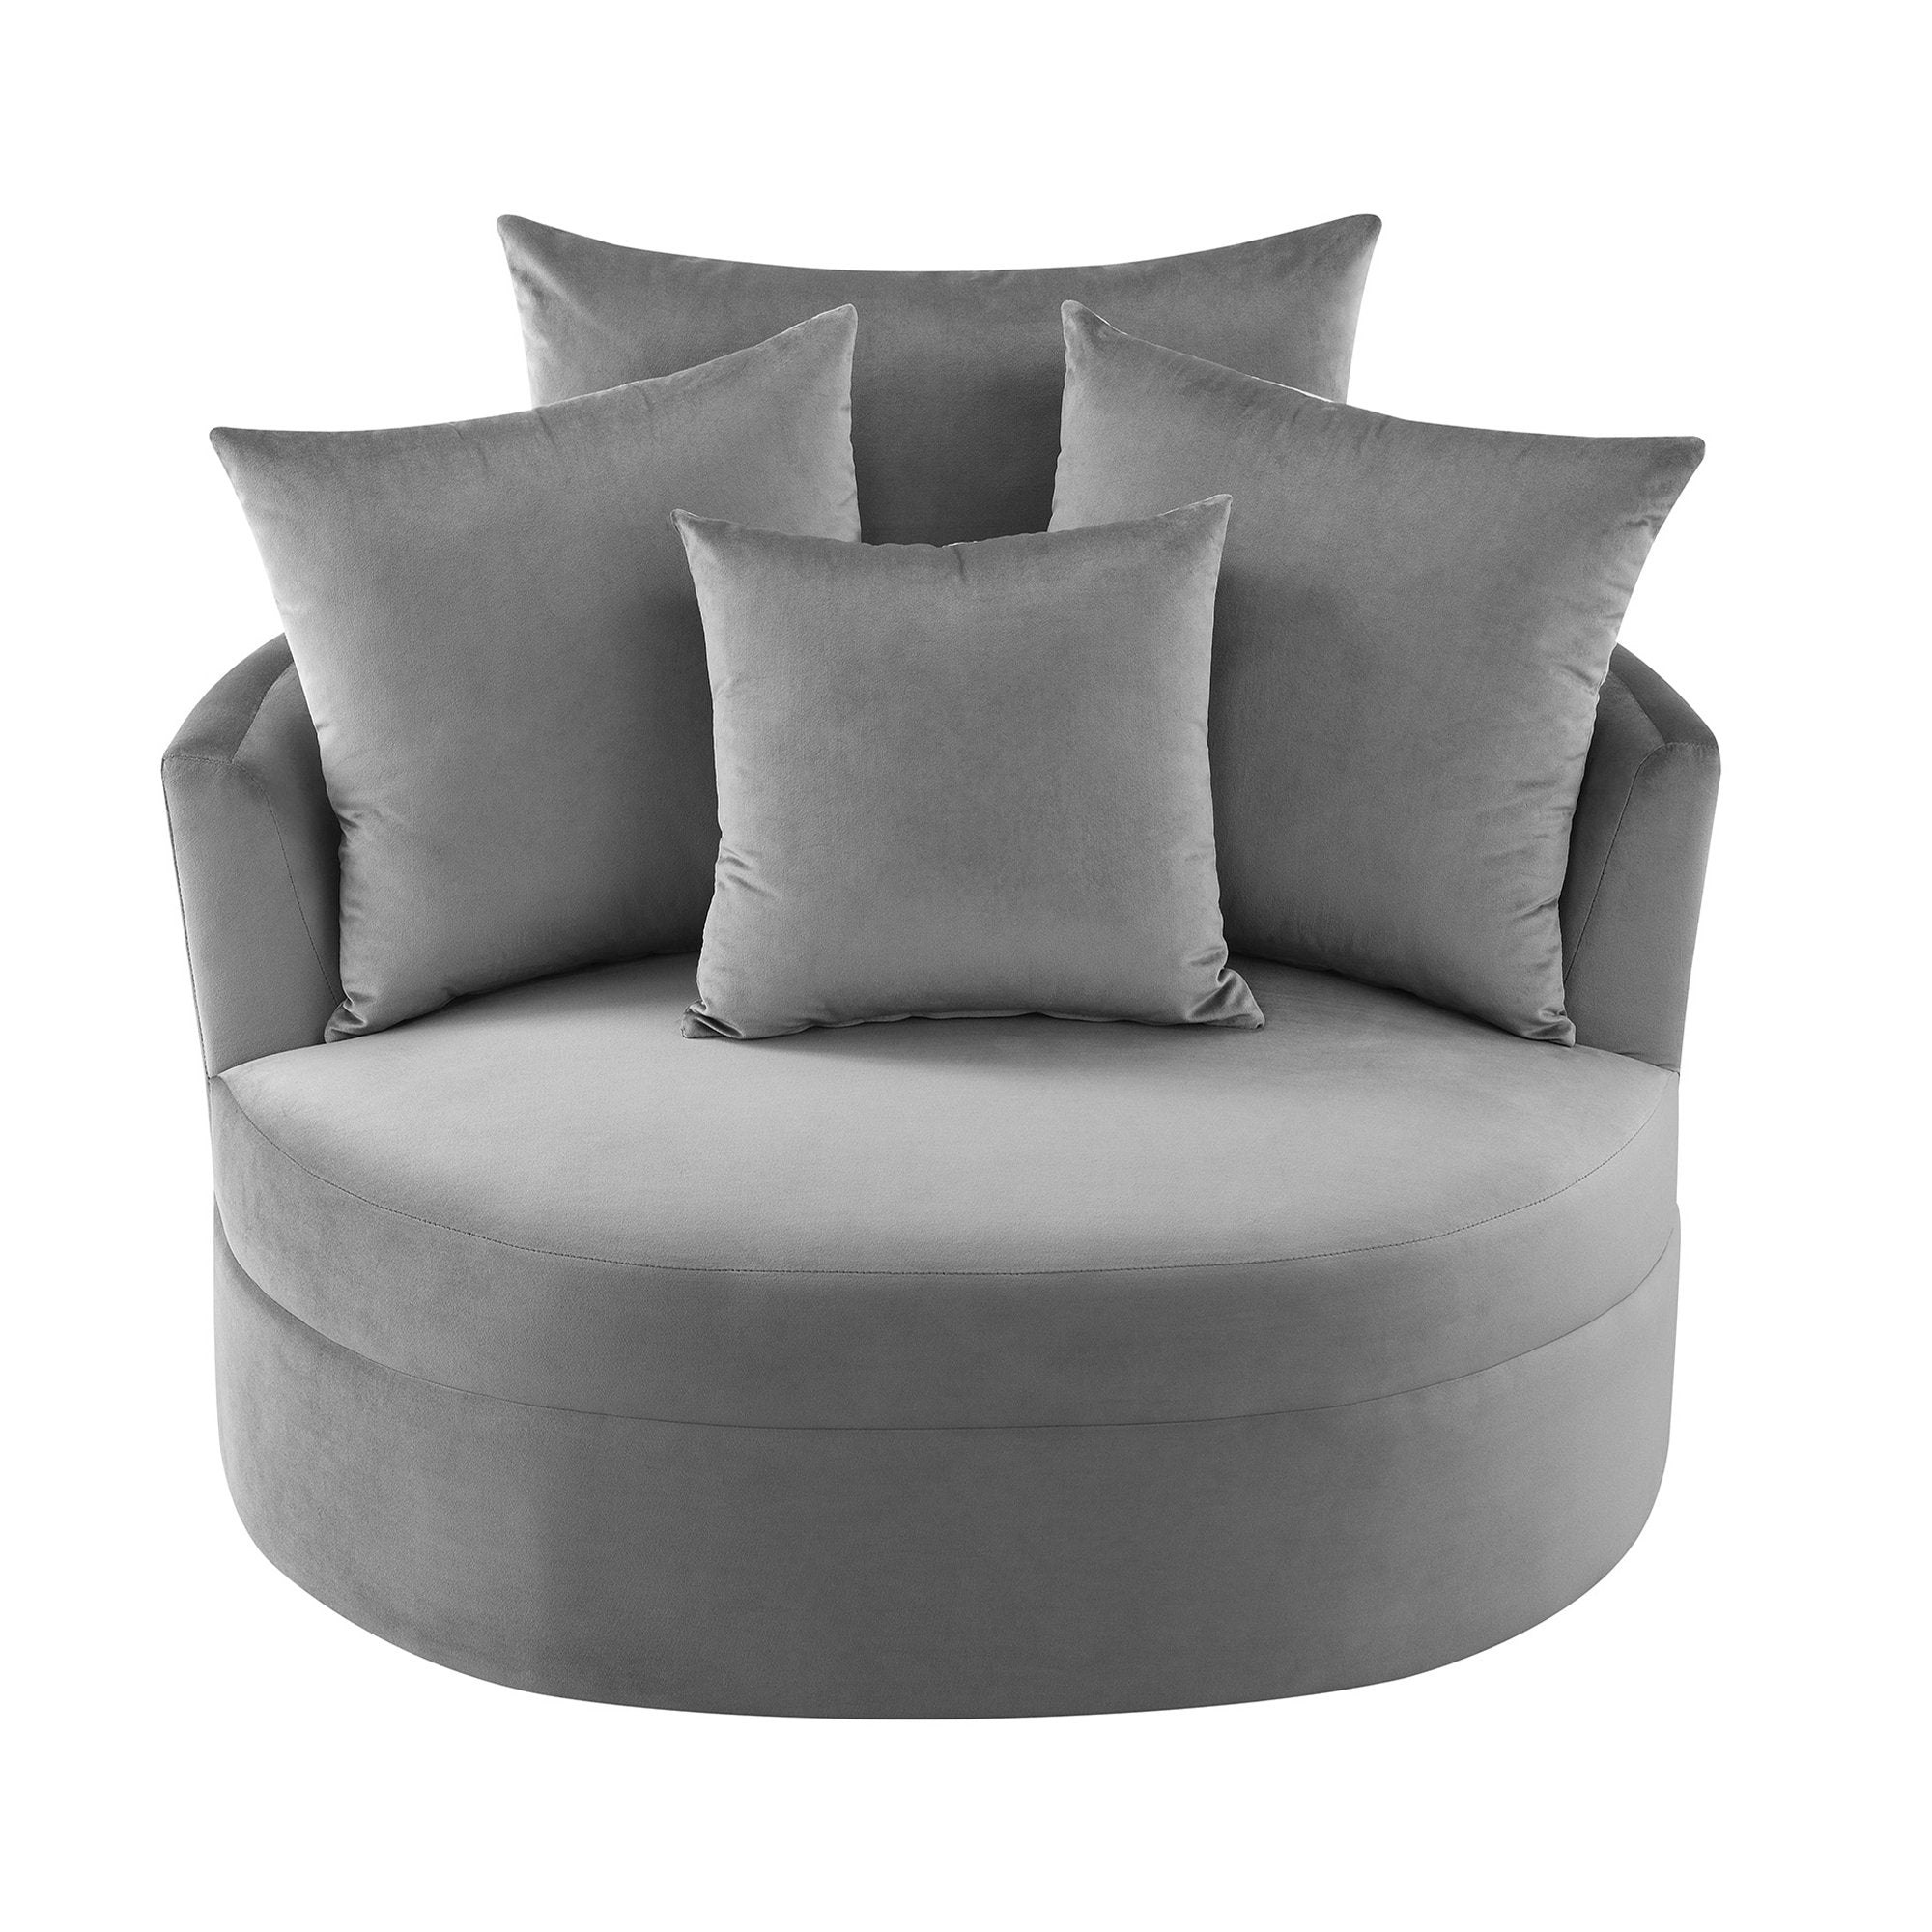 360° Swivel Barrel Chair with 4 Movable Pillows